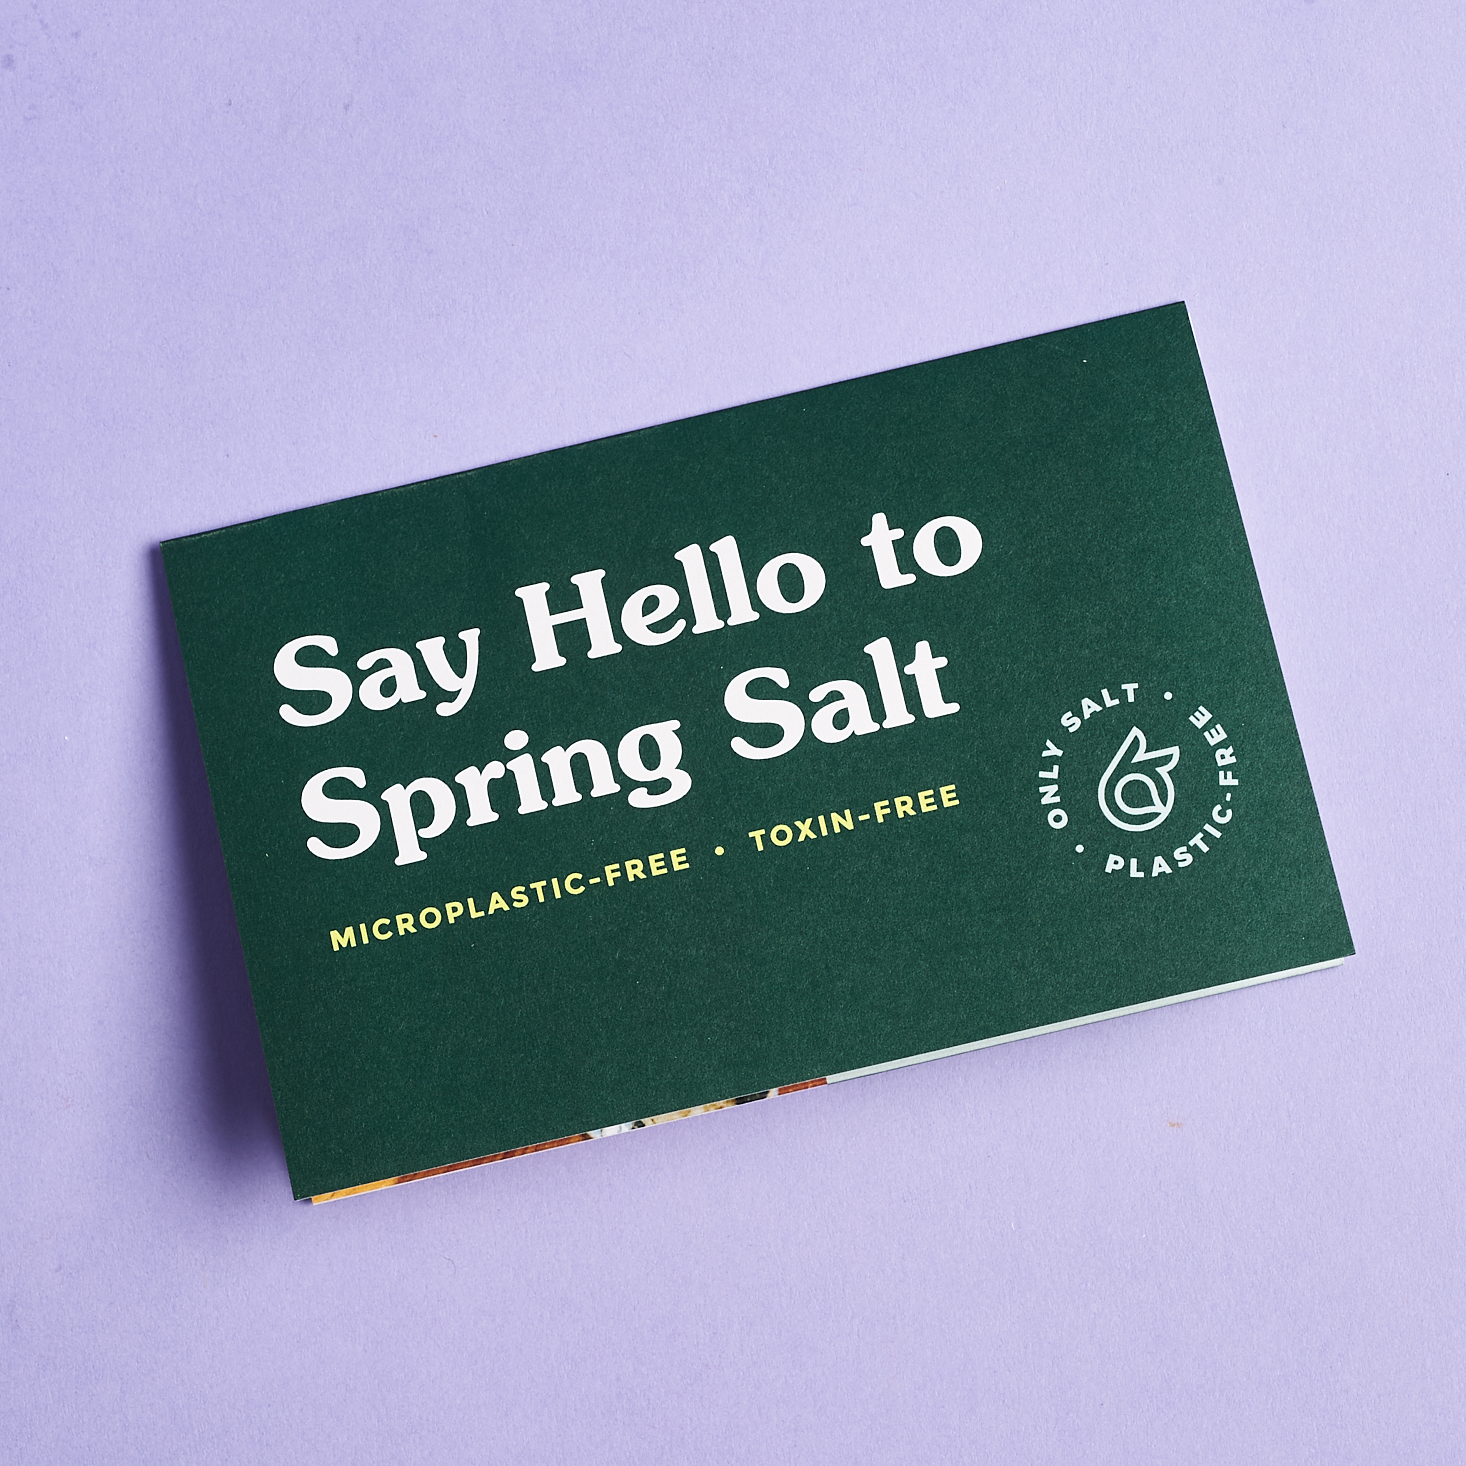 info about spring salt from Earthlove April 2021